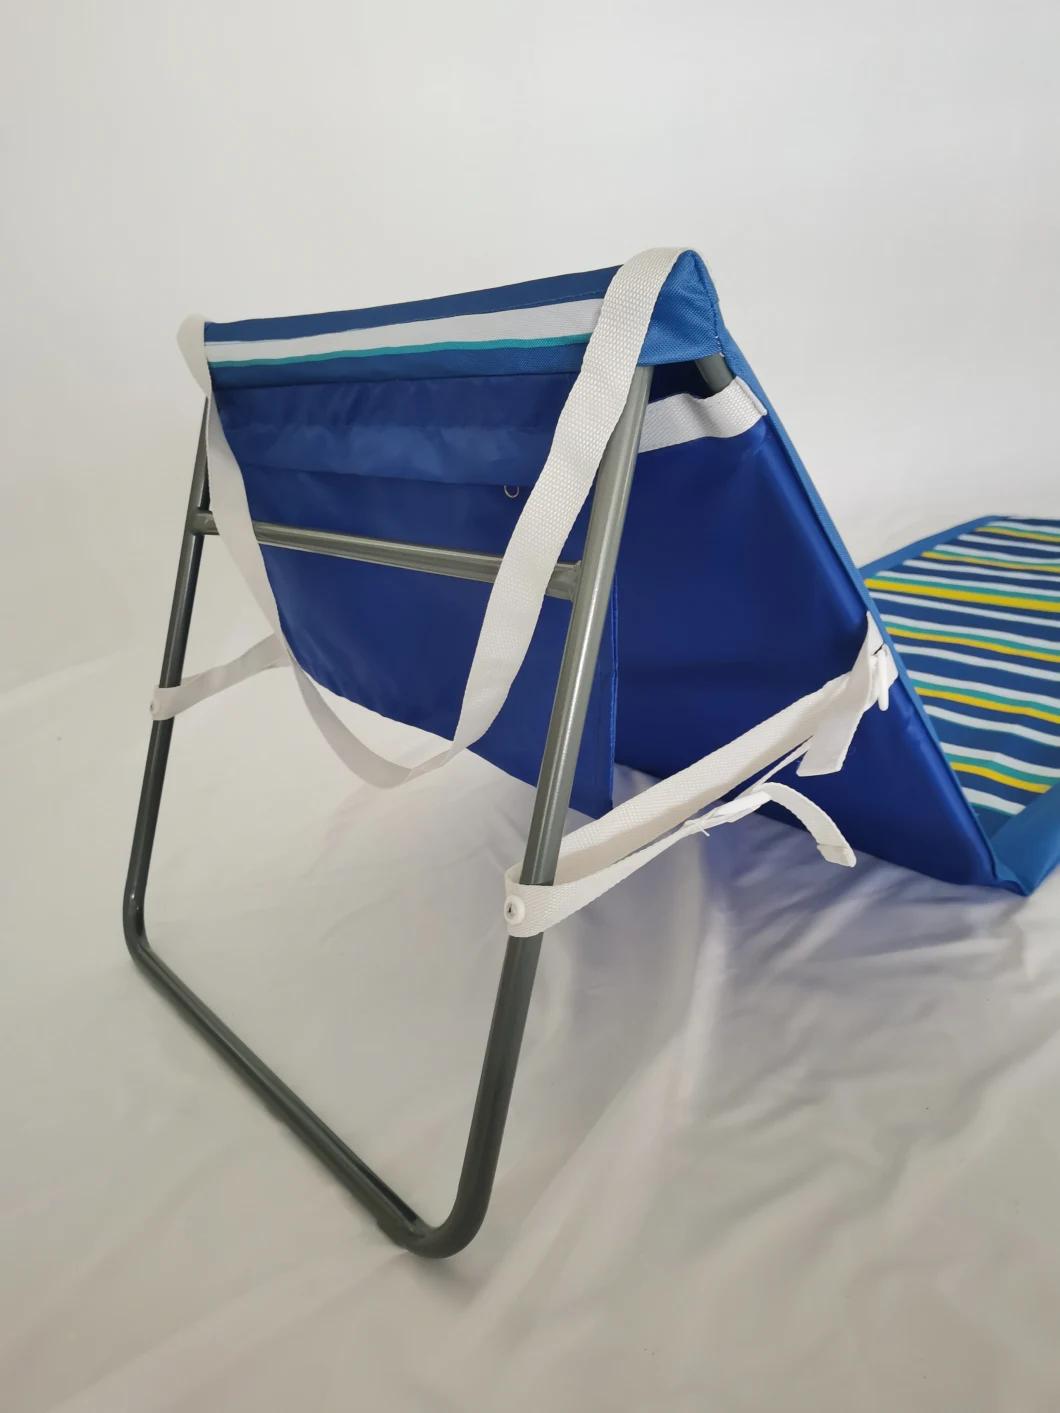 China Manufacturing Foldable Beach Chair Standard or Customization Allowed